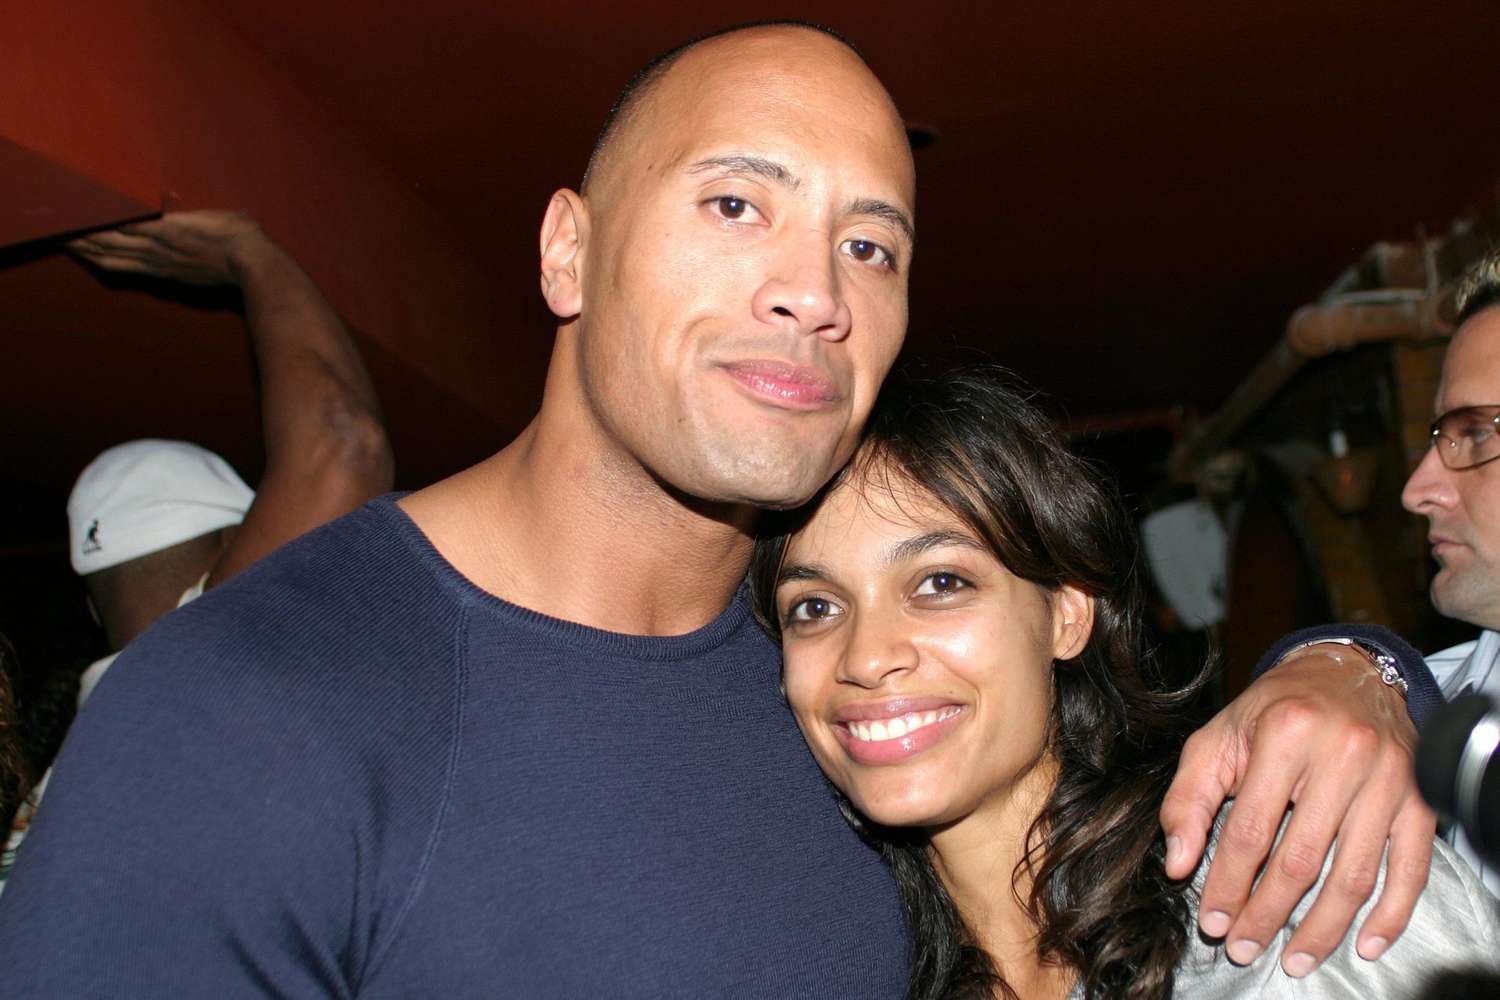 Dwayne 'The Rock' Johnson With Rosario Dawson at Oneworld Magazine's Badass Party in New York City on Sept. 25, 2003&nbsp;